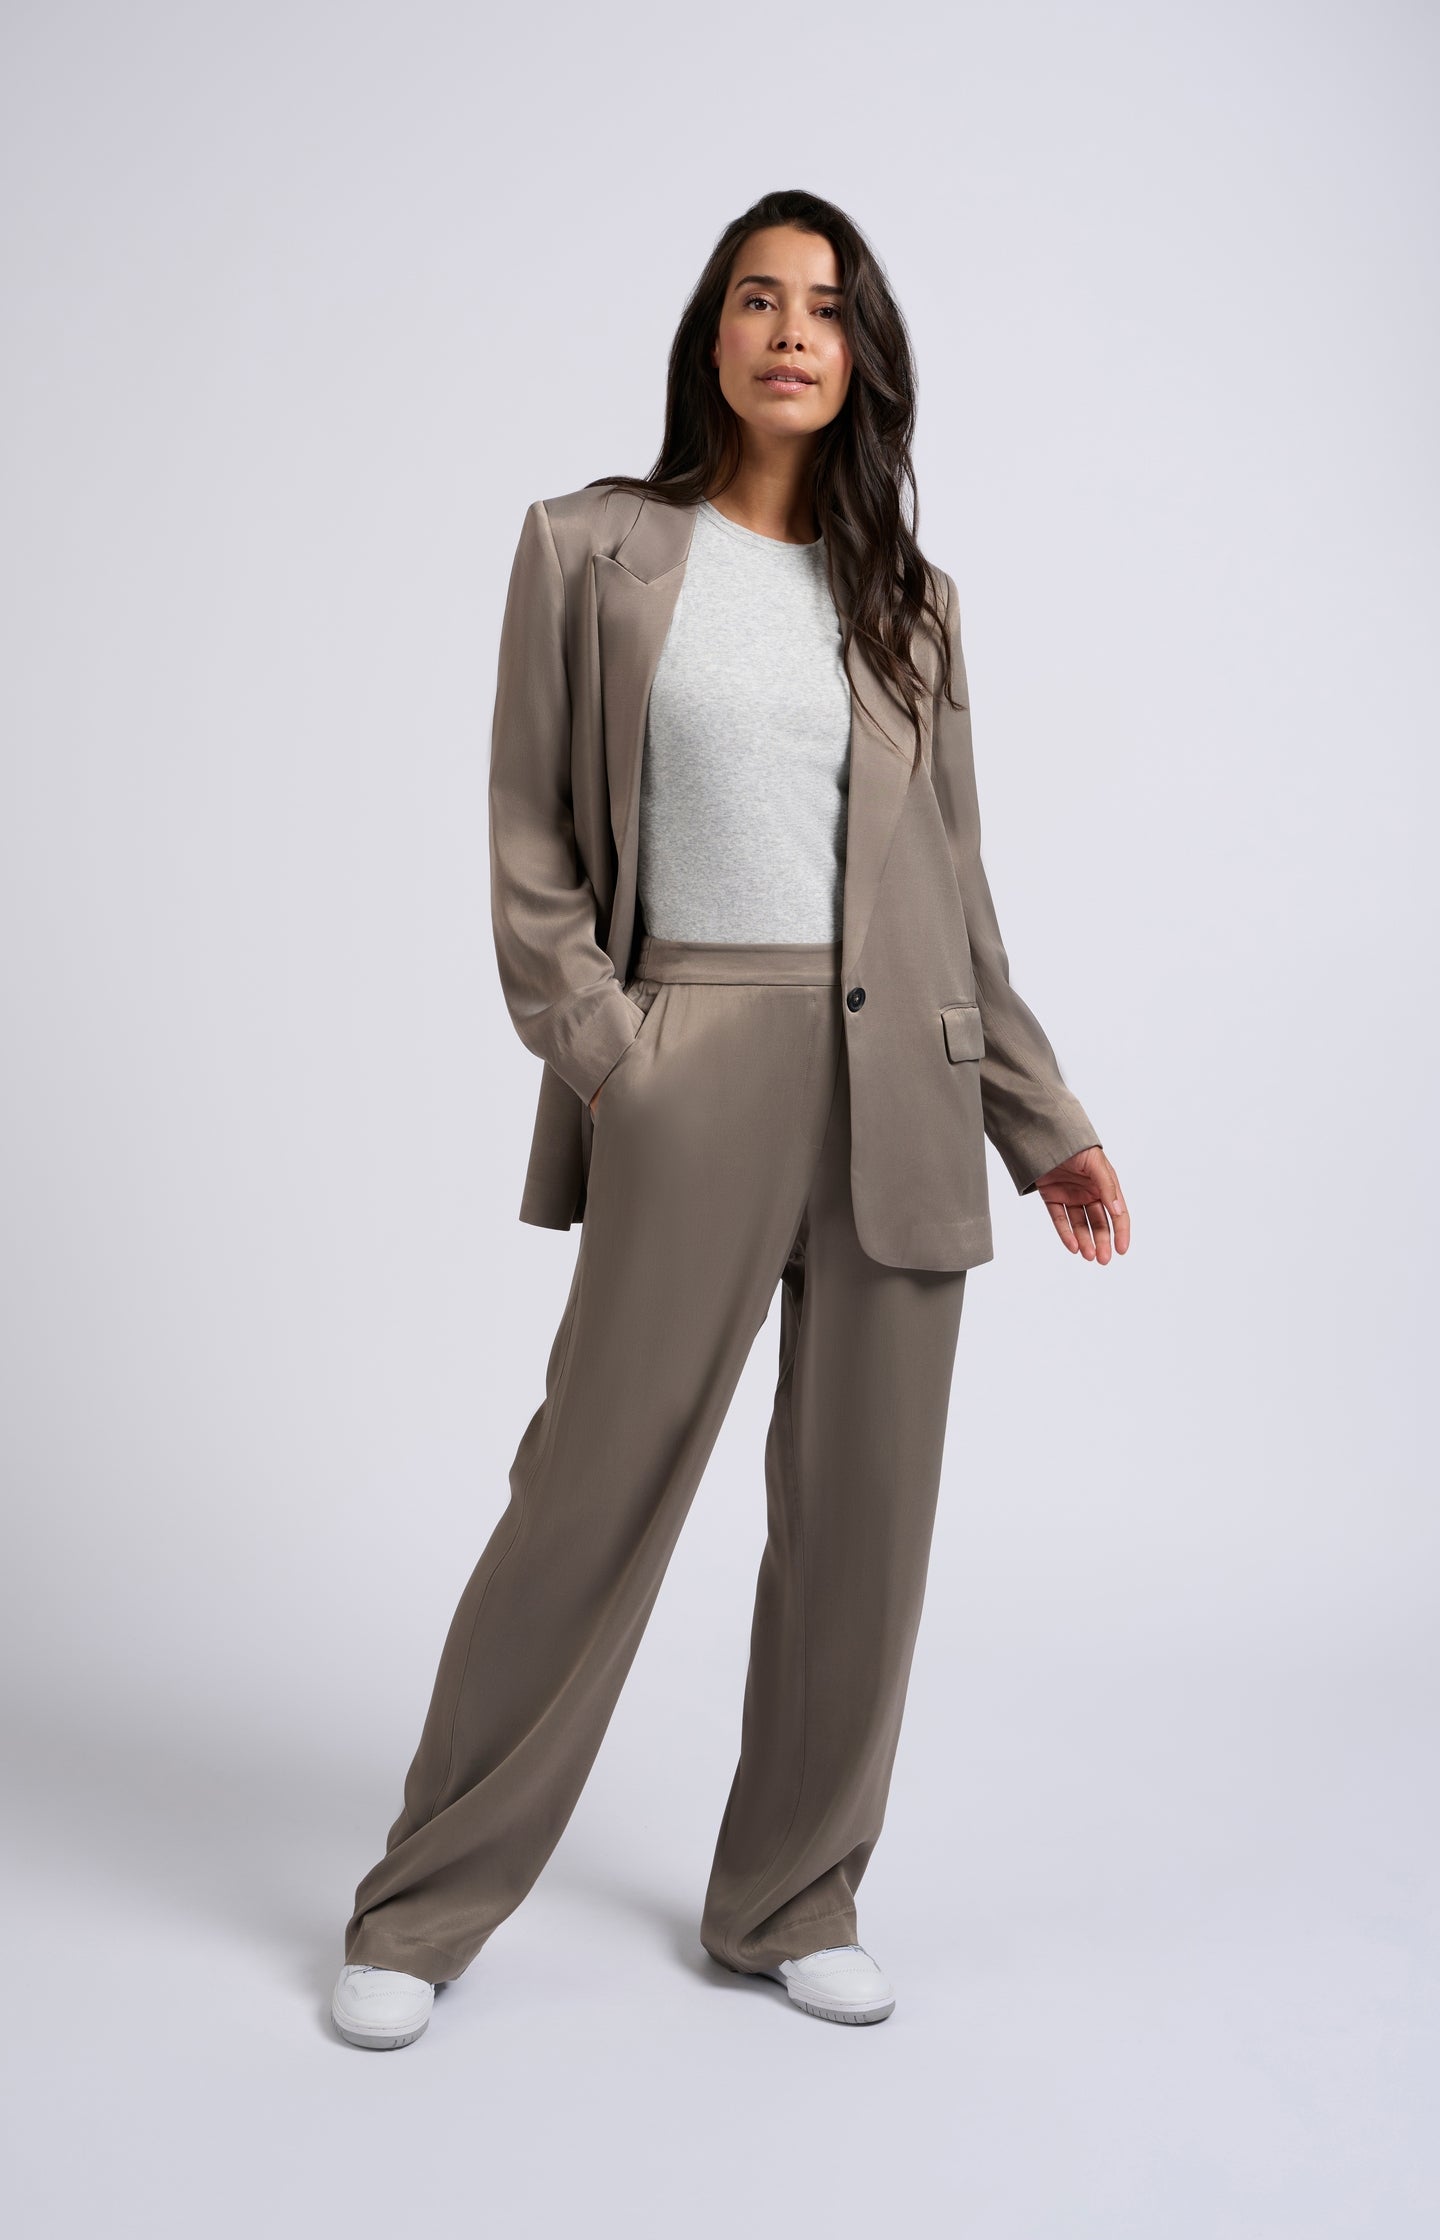 Satin trousers with wide legs and elastic waistband - Type: lookbook